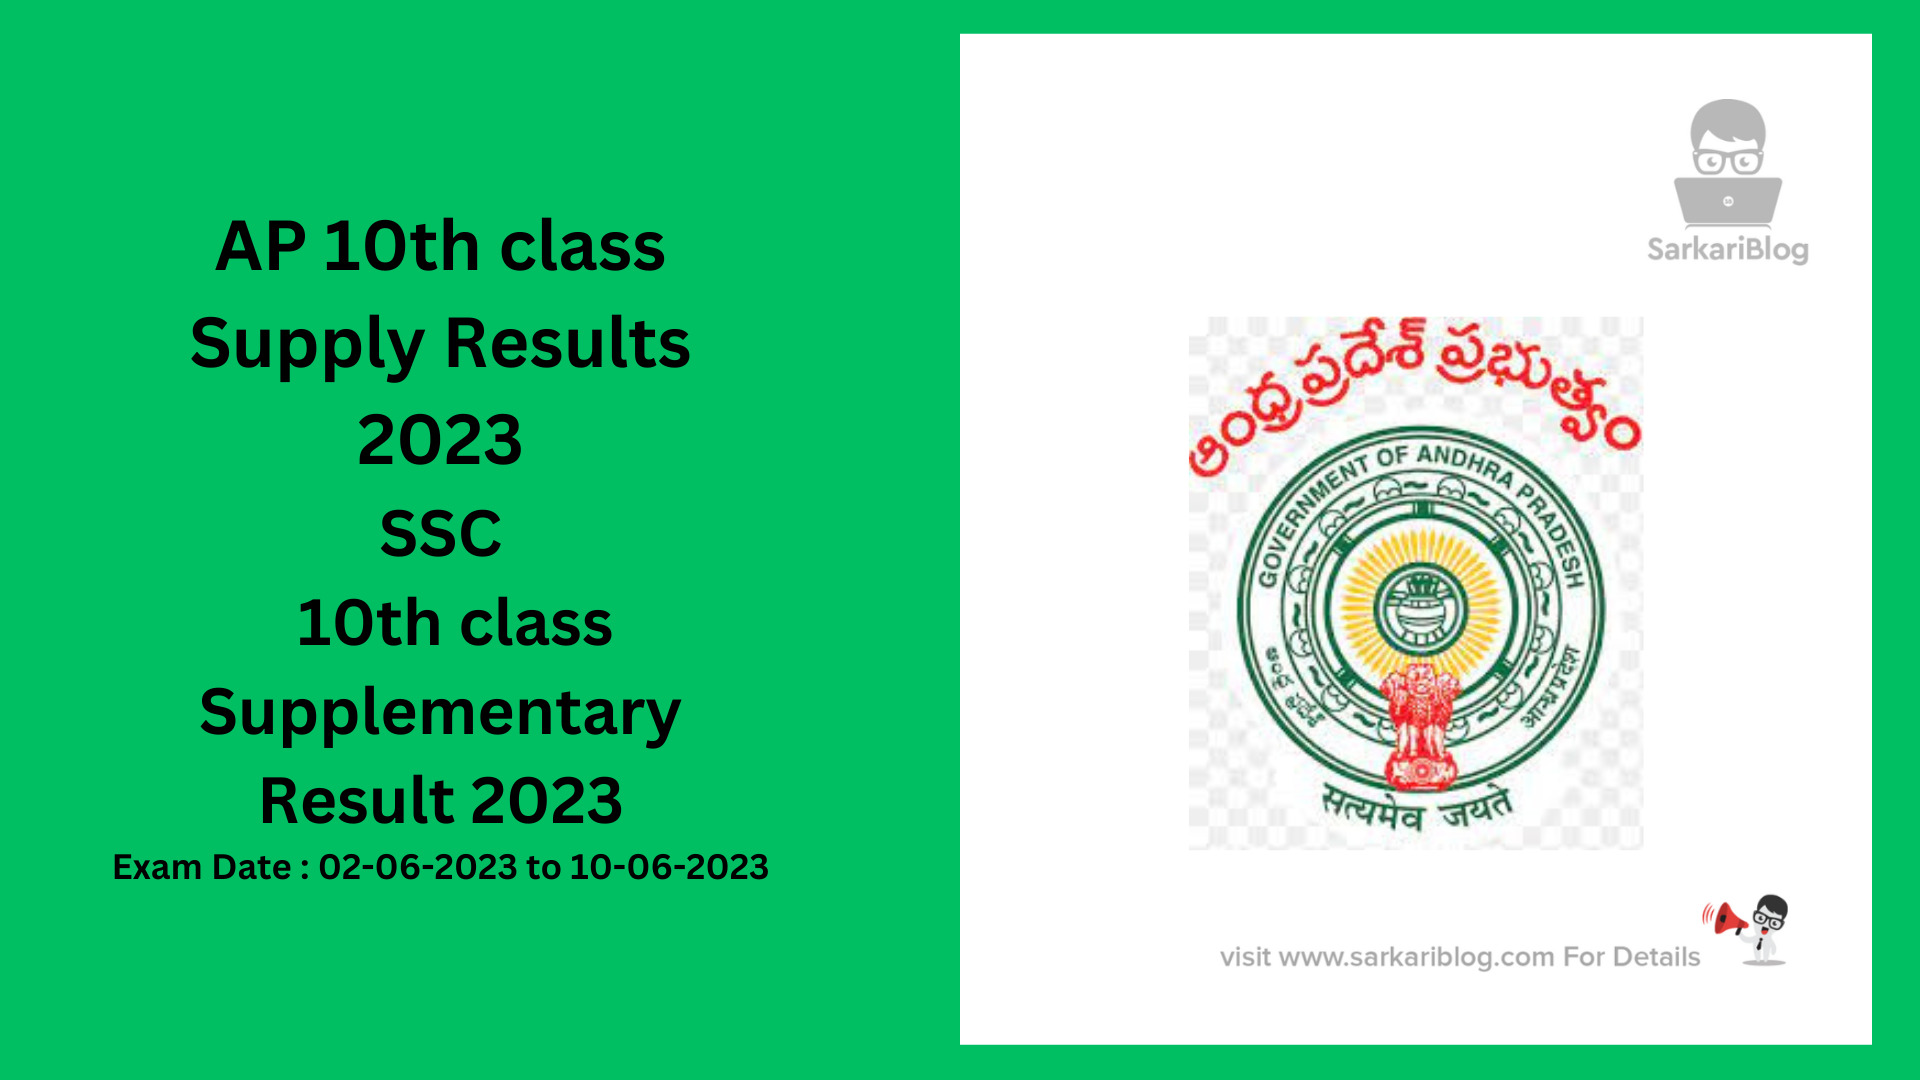 AP 10th class Supply Results 2023